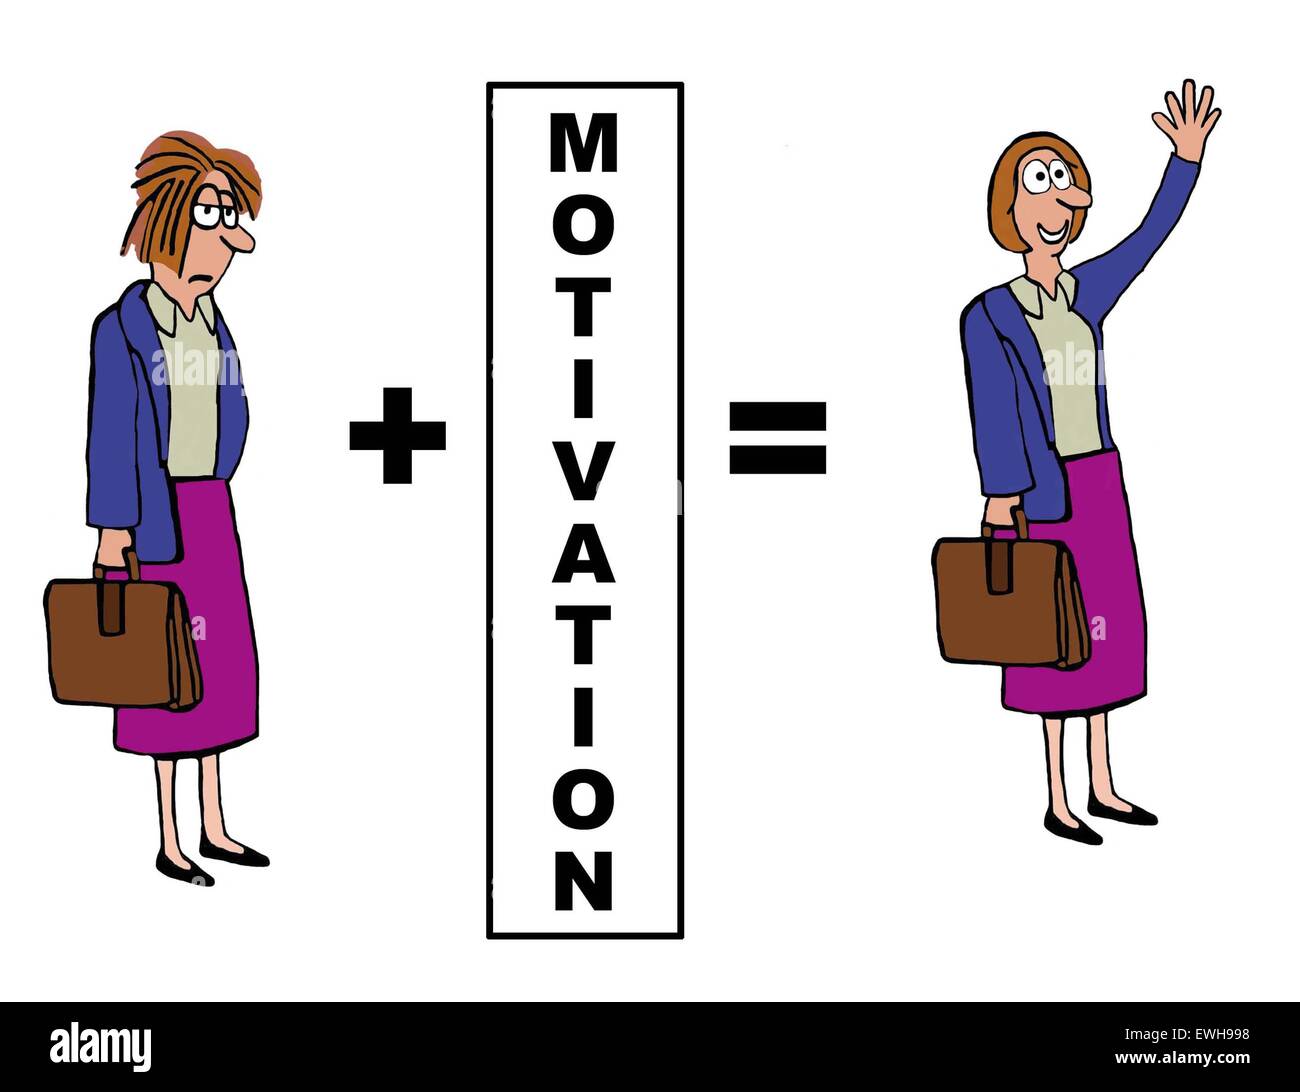 Business cartoon showing the positive impact of 'motivation' on the businesswoman. Stock Photo